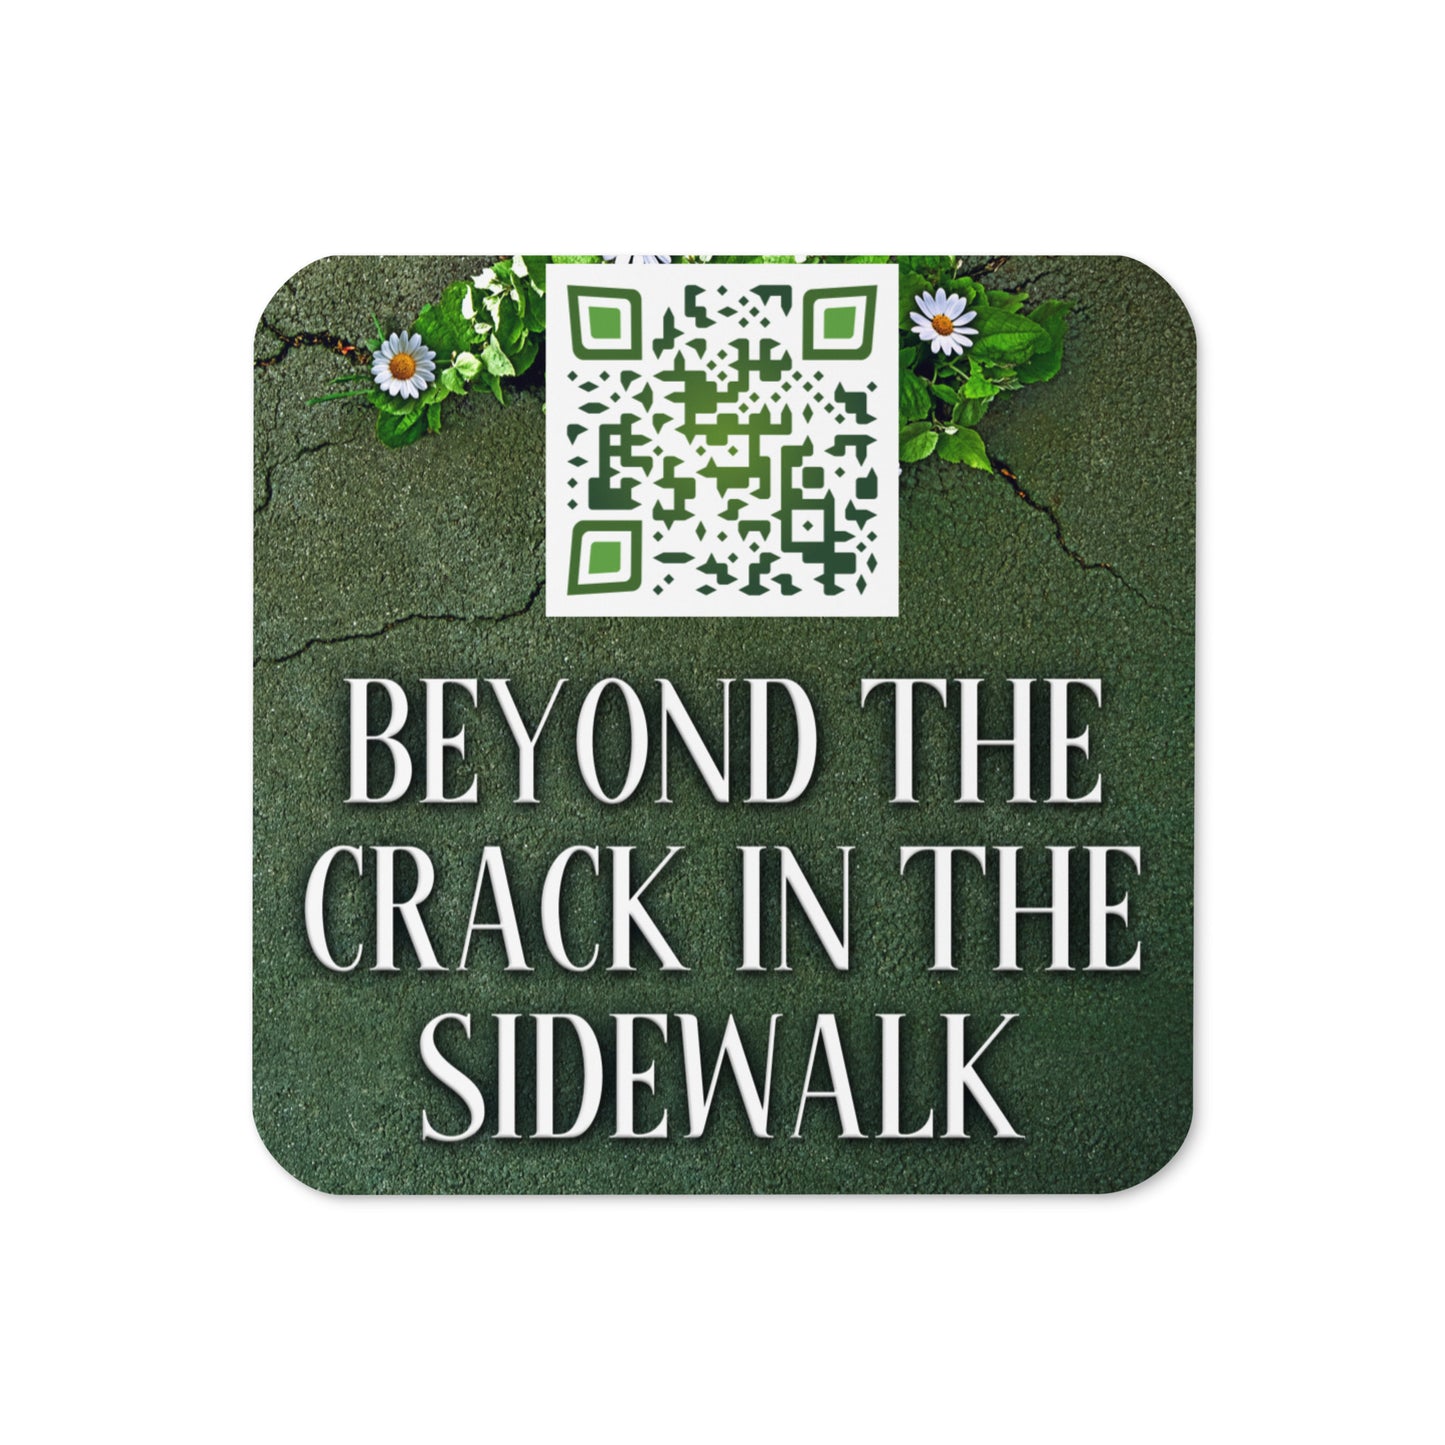 coaster with cover art from Maryann Miller's book Beyond The Crack In The Sidewalk